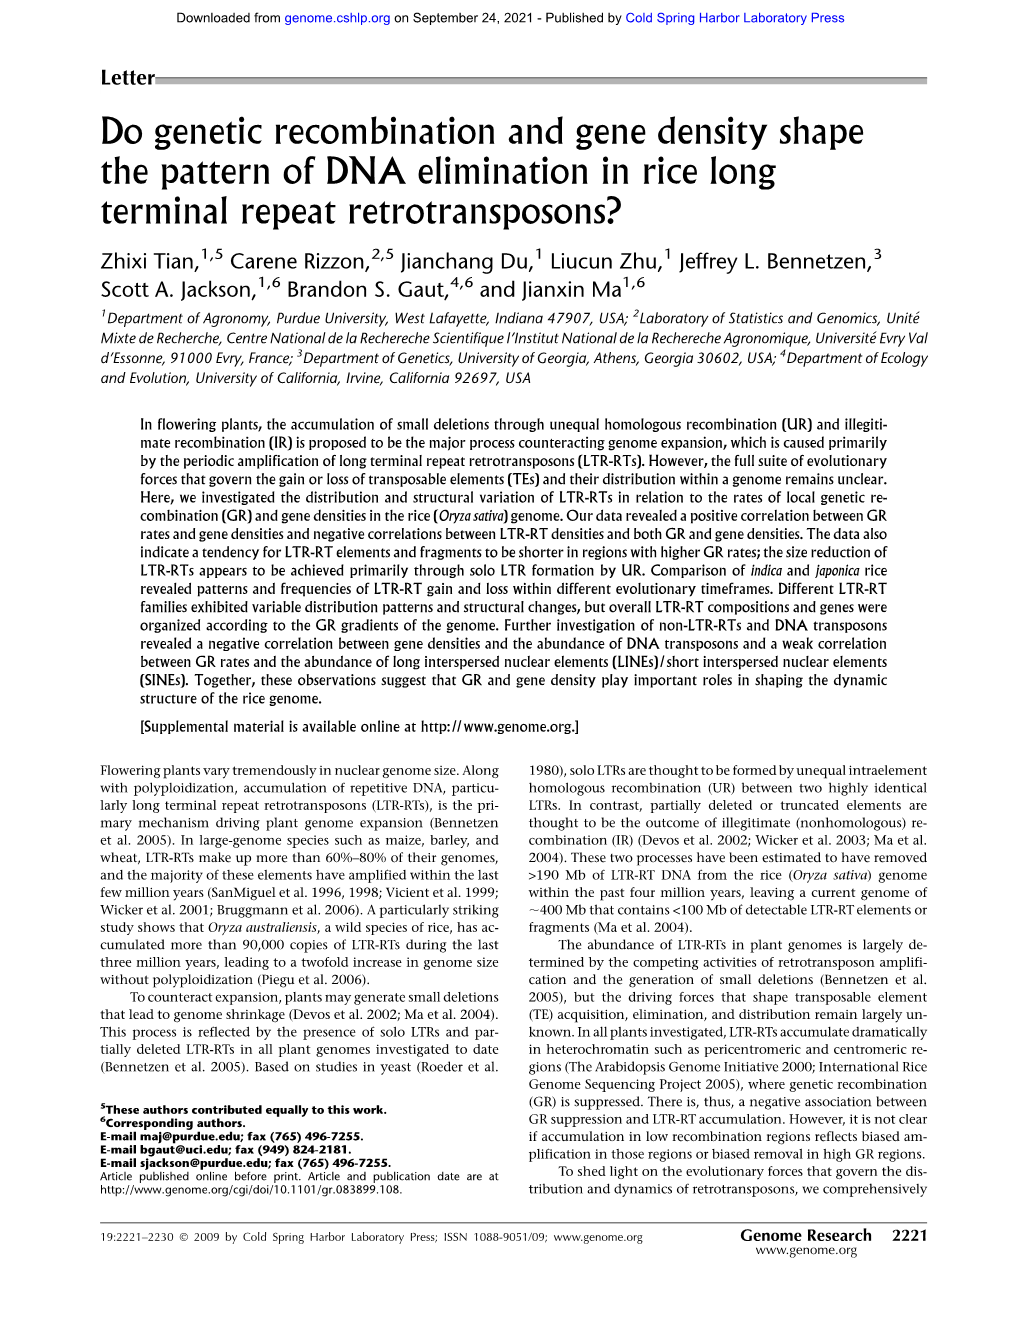 Do Genetic Recombination and Gene Density Shape the Pattern of DNA Elimination in Rice Long Terminal Repeat Retrotransposons?